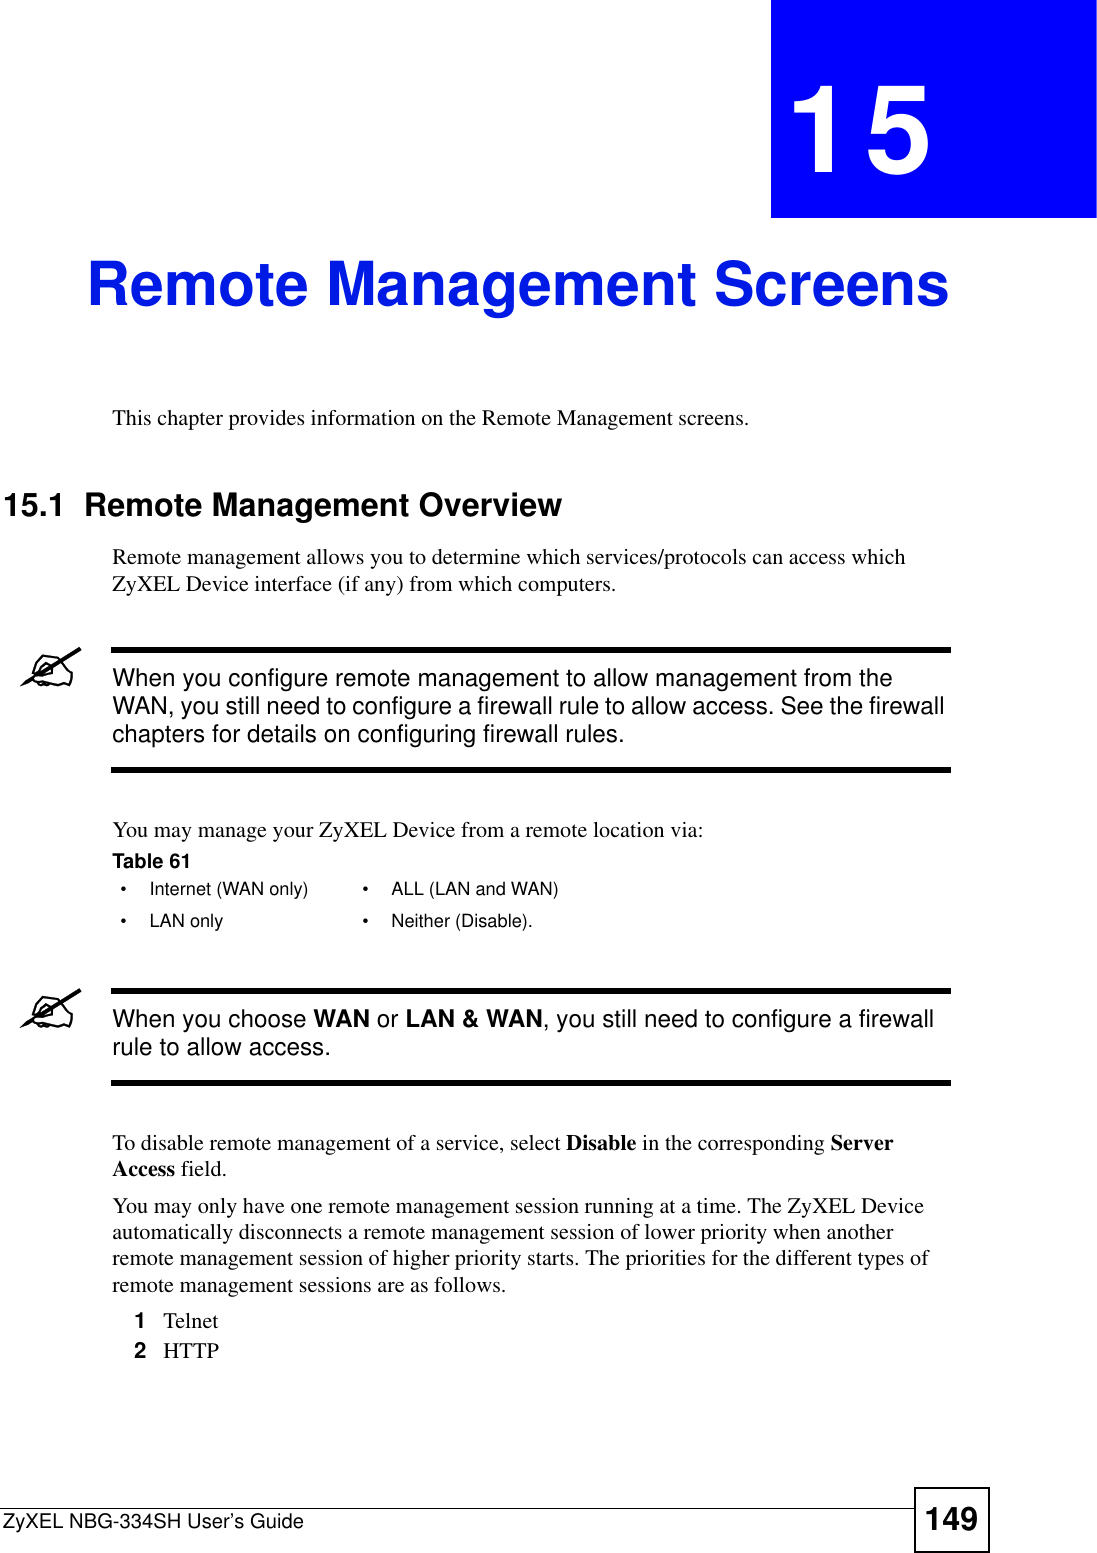 ZyXEL NBG-334SH User’s Guide 149CHAPTER 15Remote Management ScreensThis chapter provides information on the Remote Management screens. 15.1  Remote Management OverviewRemote management allows you to determine which services/protocols can access which ZyXEL Device interface (if any) from which computers.&quot;When you configure remote management to allow management from the WAN, you still need to configure a firewall rule to allow access. See the firewall chapters for details on configuring firewall rules.You may manage your ZyXEL Device from a remote location via:&quot;When you choose WAN or LAN &amp; WAN, you still need to configure a firewall rule to allow access.To disable remote management of a service, select Disable in the corresponding Server Access field.You may only have one remote management session running at a time. The ZyXEL Device automatically disconnects a remote management session of lower priority when another remote management session of higher priority starts. The priorities for the different types of remote management sessions are as follows.1Telnet2HTTPTable 61   • Internet (WAN only) • ALL (LAN and WAN)• LAN only • Neither (Disable).